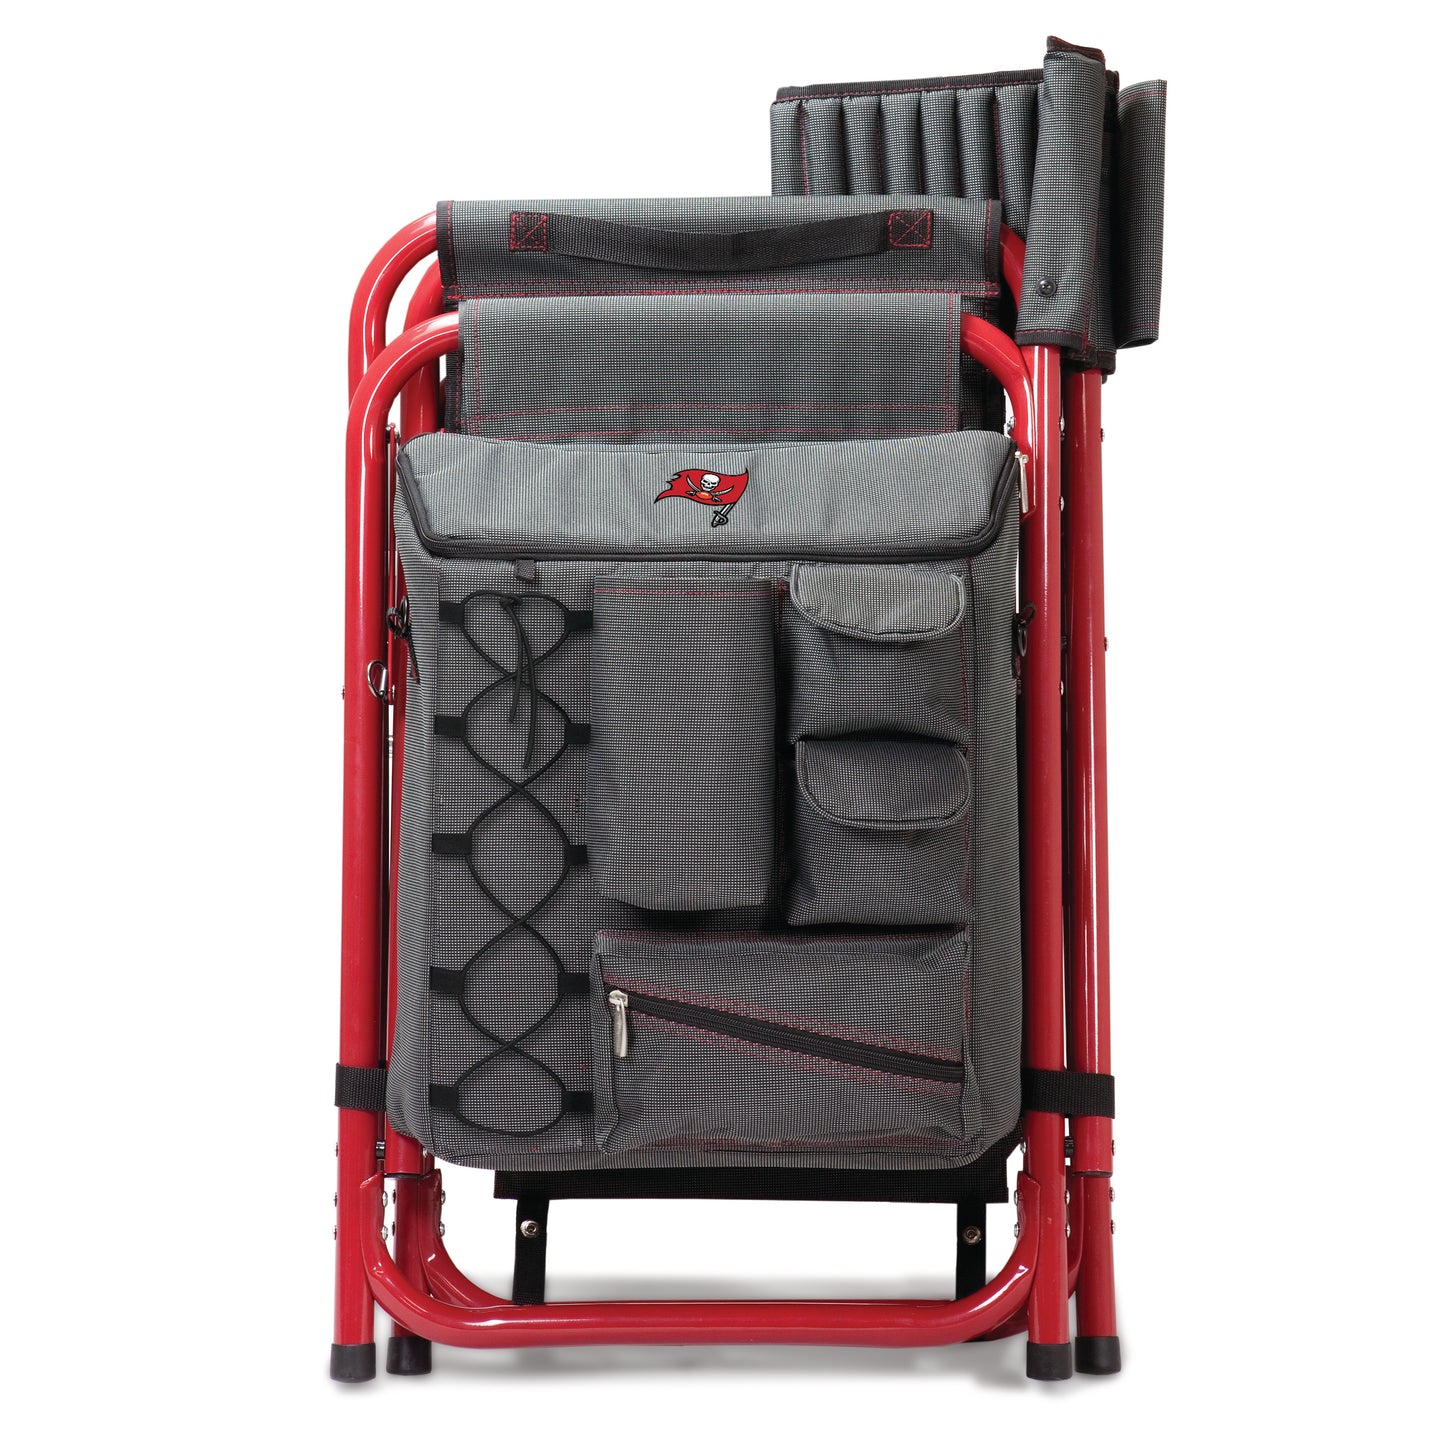 Tampa Bay Buccaneers - Fusion Camping Chair